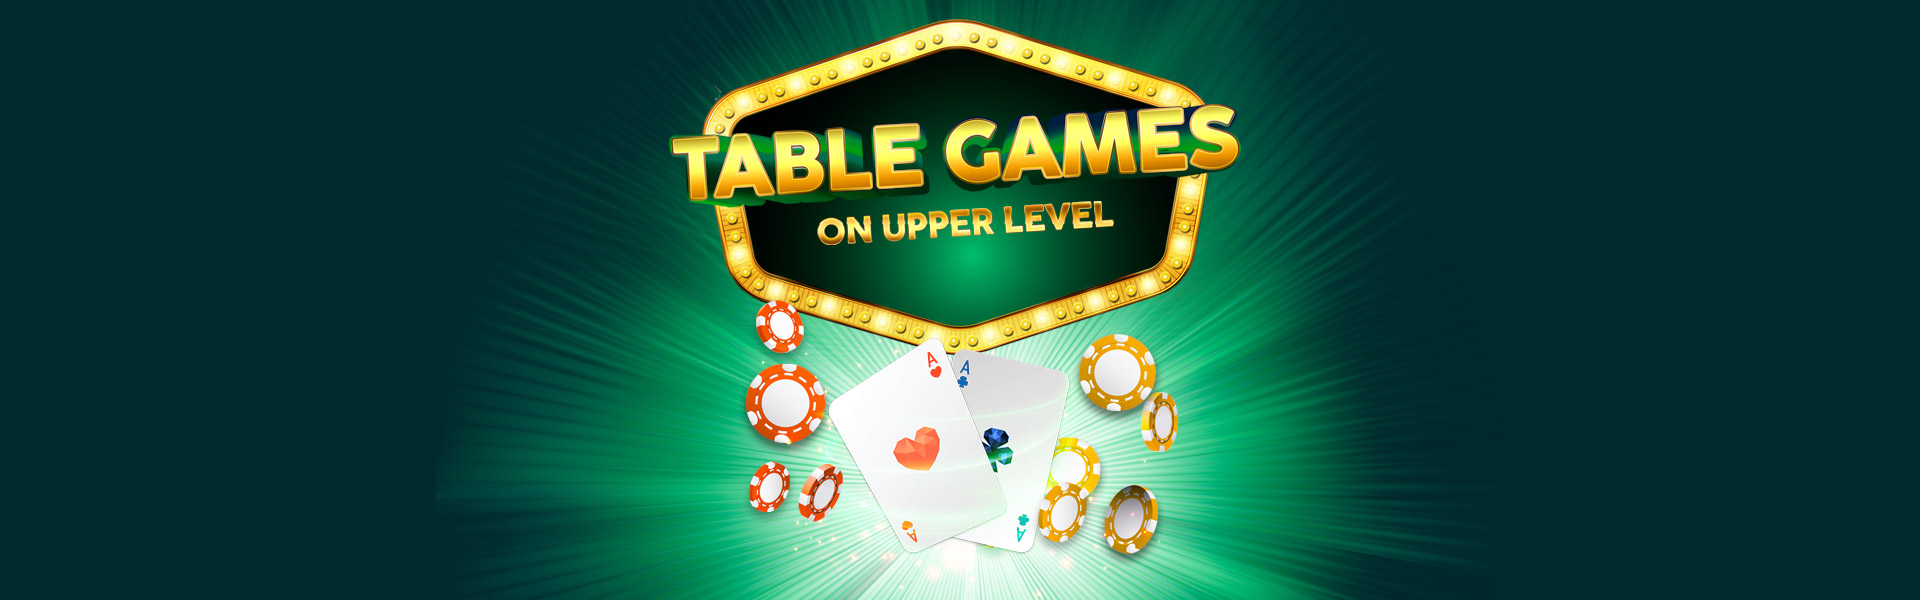 Table Games on Upper Level